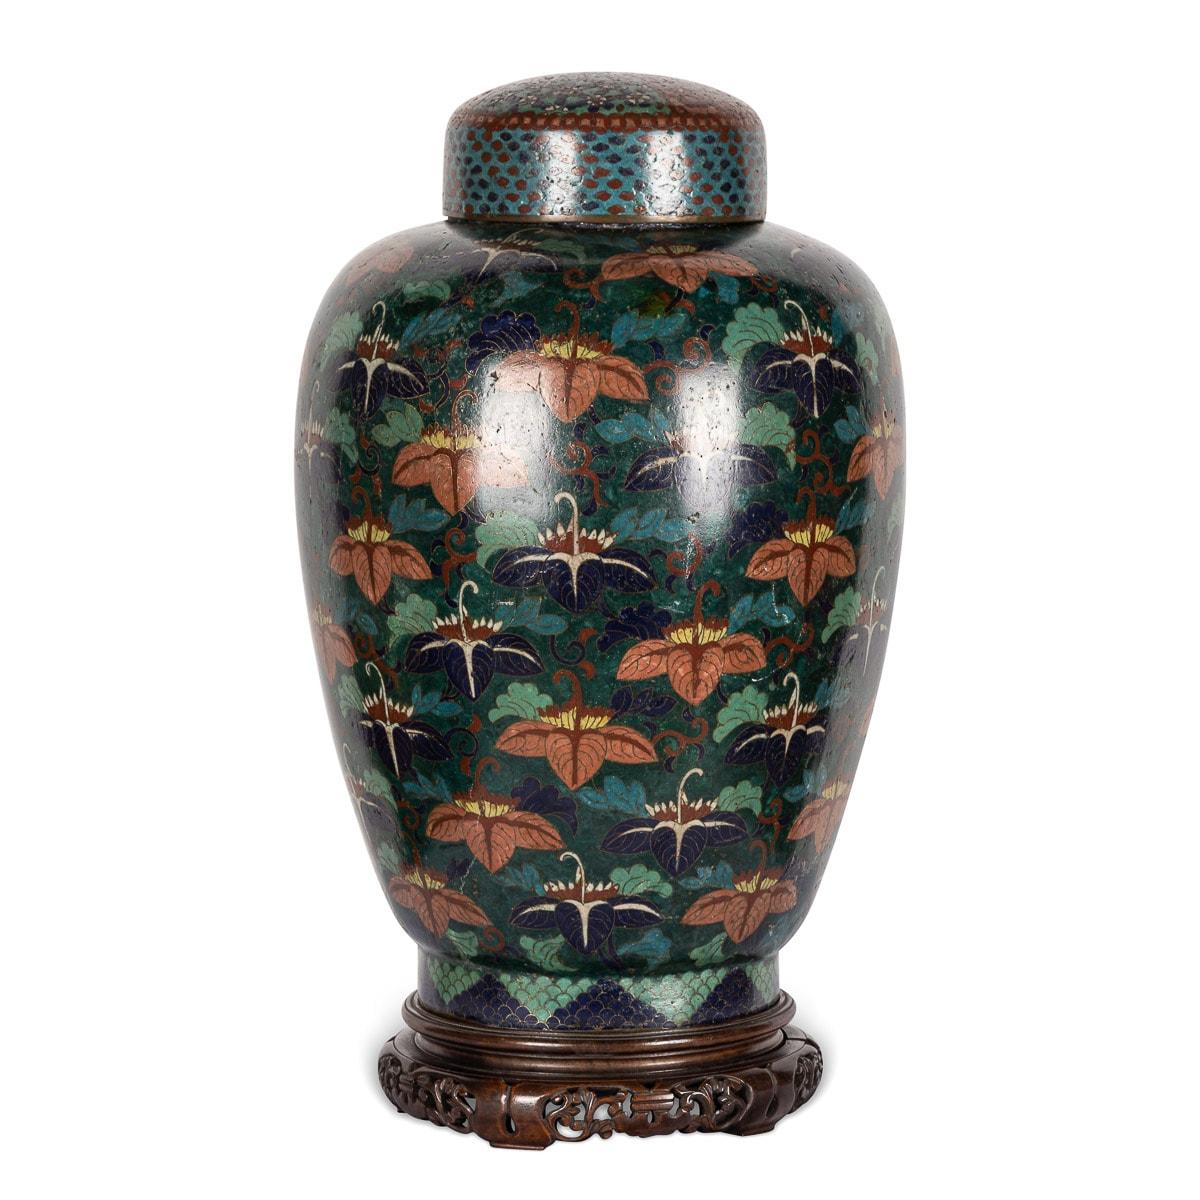 Antique pair of 19th Century Chinese cloisonné enamel famille noir ginger jars featuring a black background with an abundance of verte colour foliage and flowers. Standing on a fitted carved wood stand. Rare colour, in excellent condition with